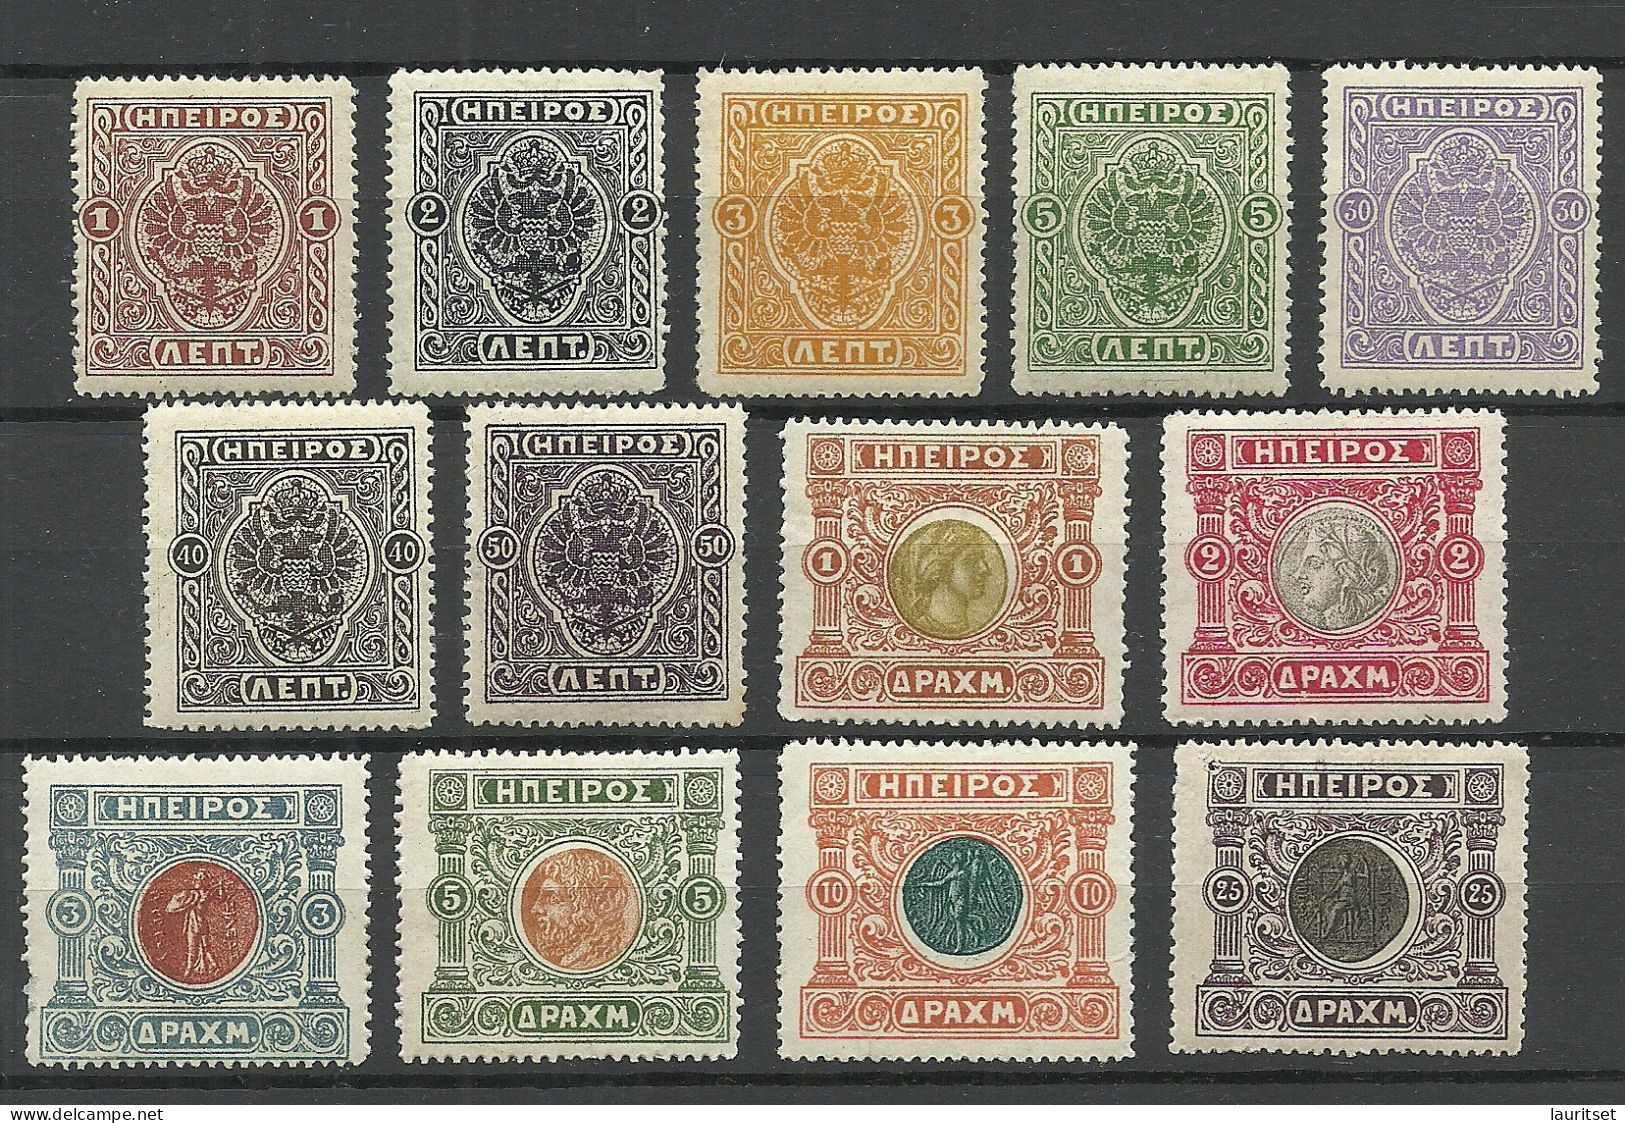 EPIRUS Epeiros Greece 1920 Unofficial Issue MNH (1 Stamp Is MH/*) - North Epirus